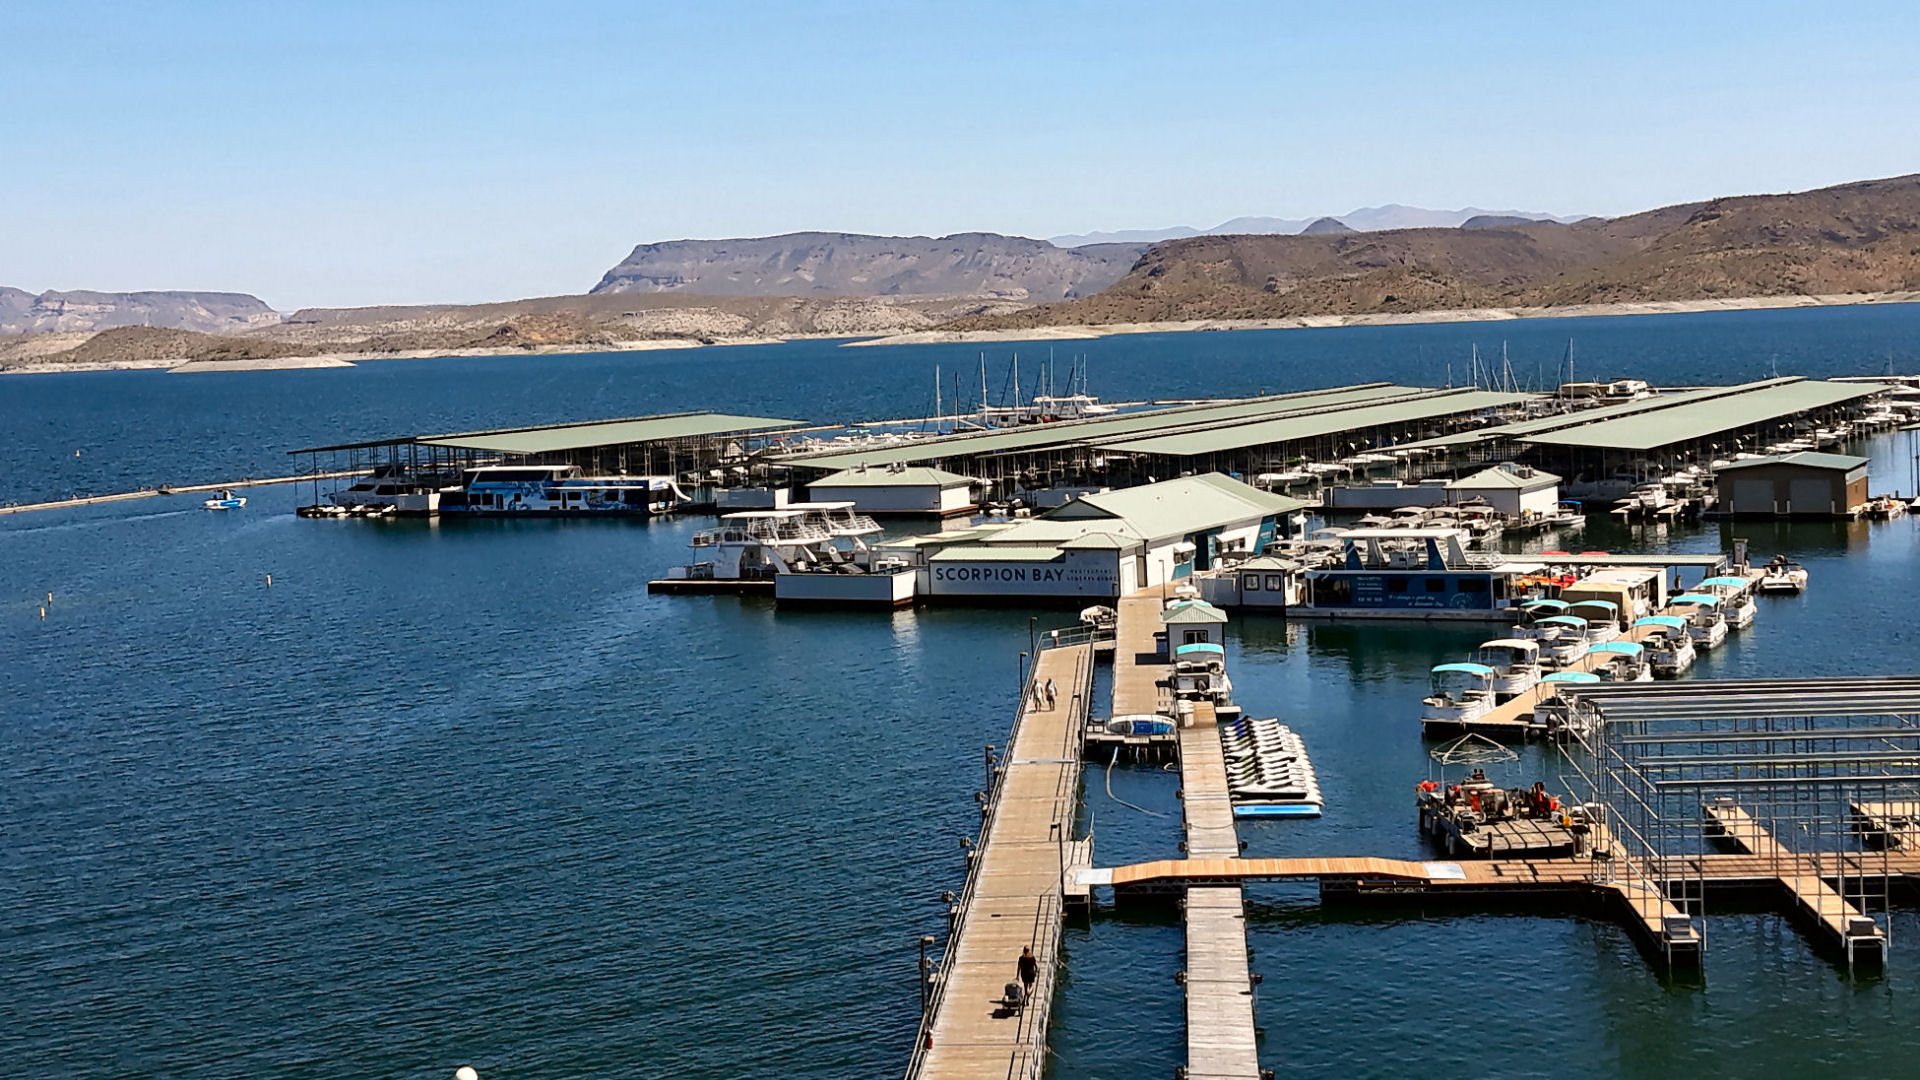 Image of a boat dock called Scorpian Bay in Lake Pleasant